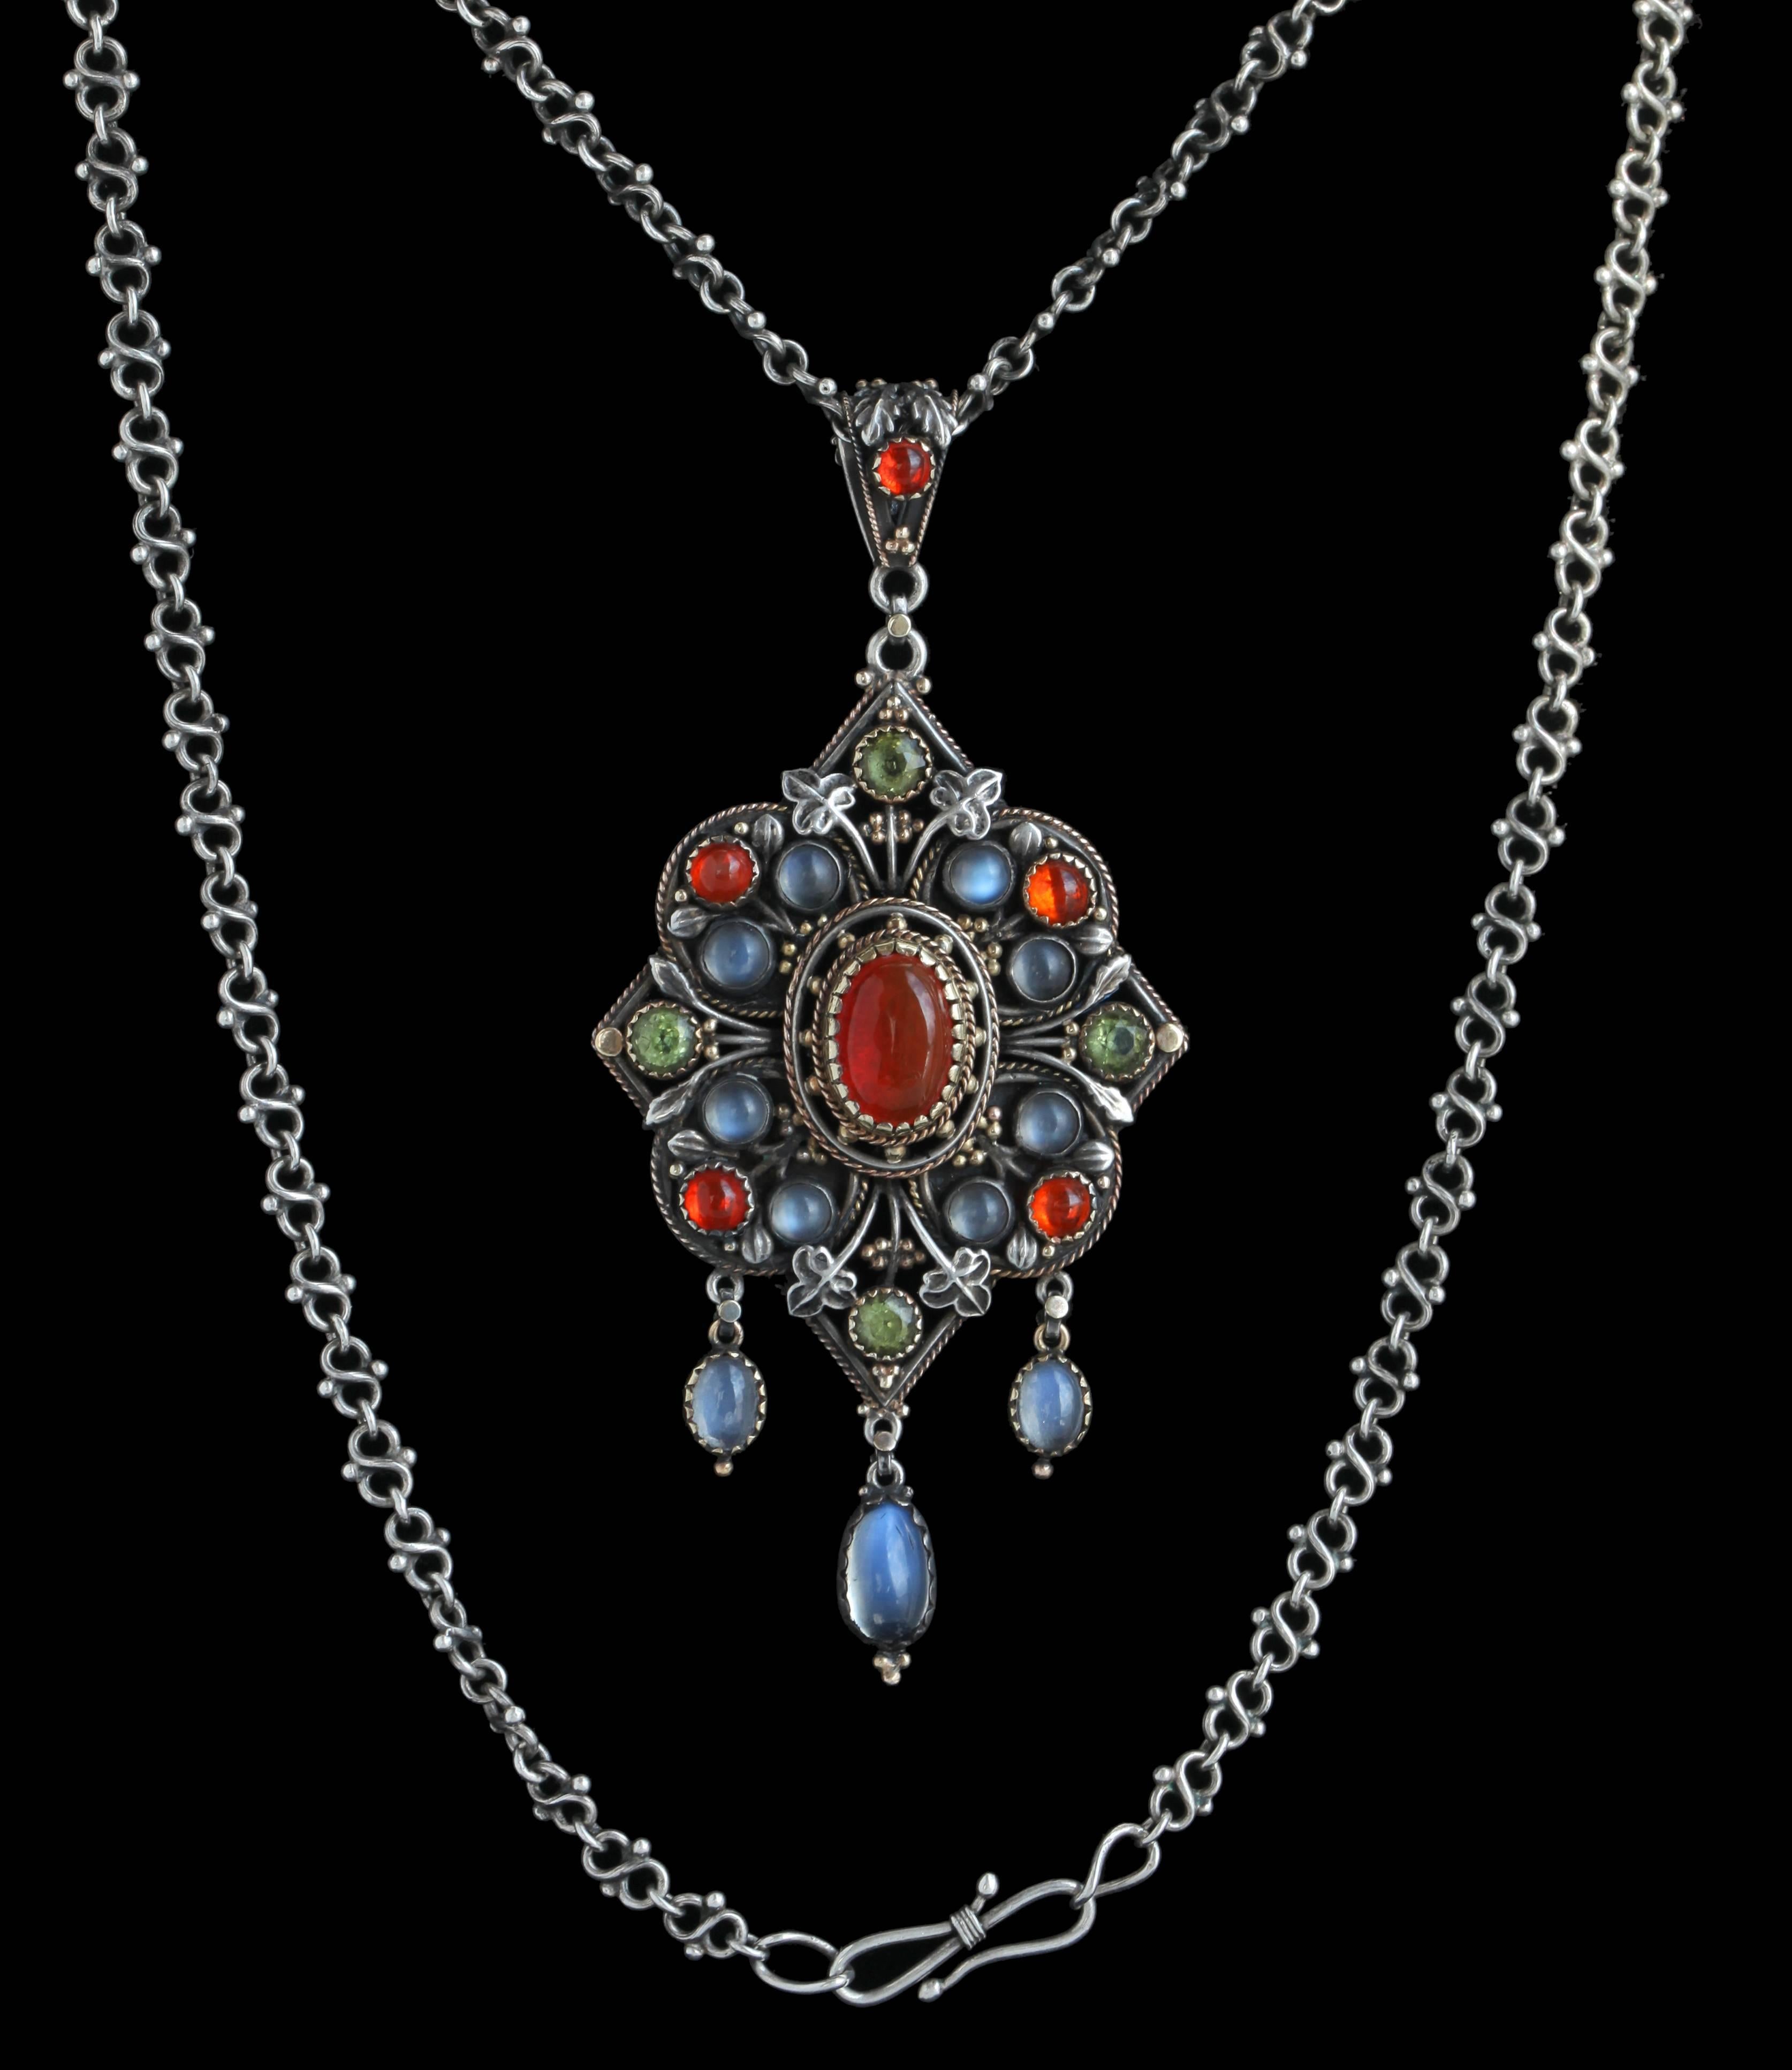 Artificers' Guild. London (1901-1942)
Attributed to Edward Spencer (1873-1938)

Silver, Gold, Fire Opal, Moonstone and Peridot

H  8.10 cm (3.19 in)    W  3.80 cm (1.50 in)    D  47.50 cm (18.70 in)

Origin: United Kingdom, c. 1900
Case: Fitted